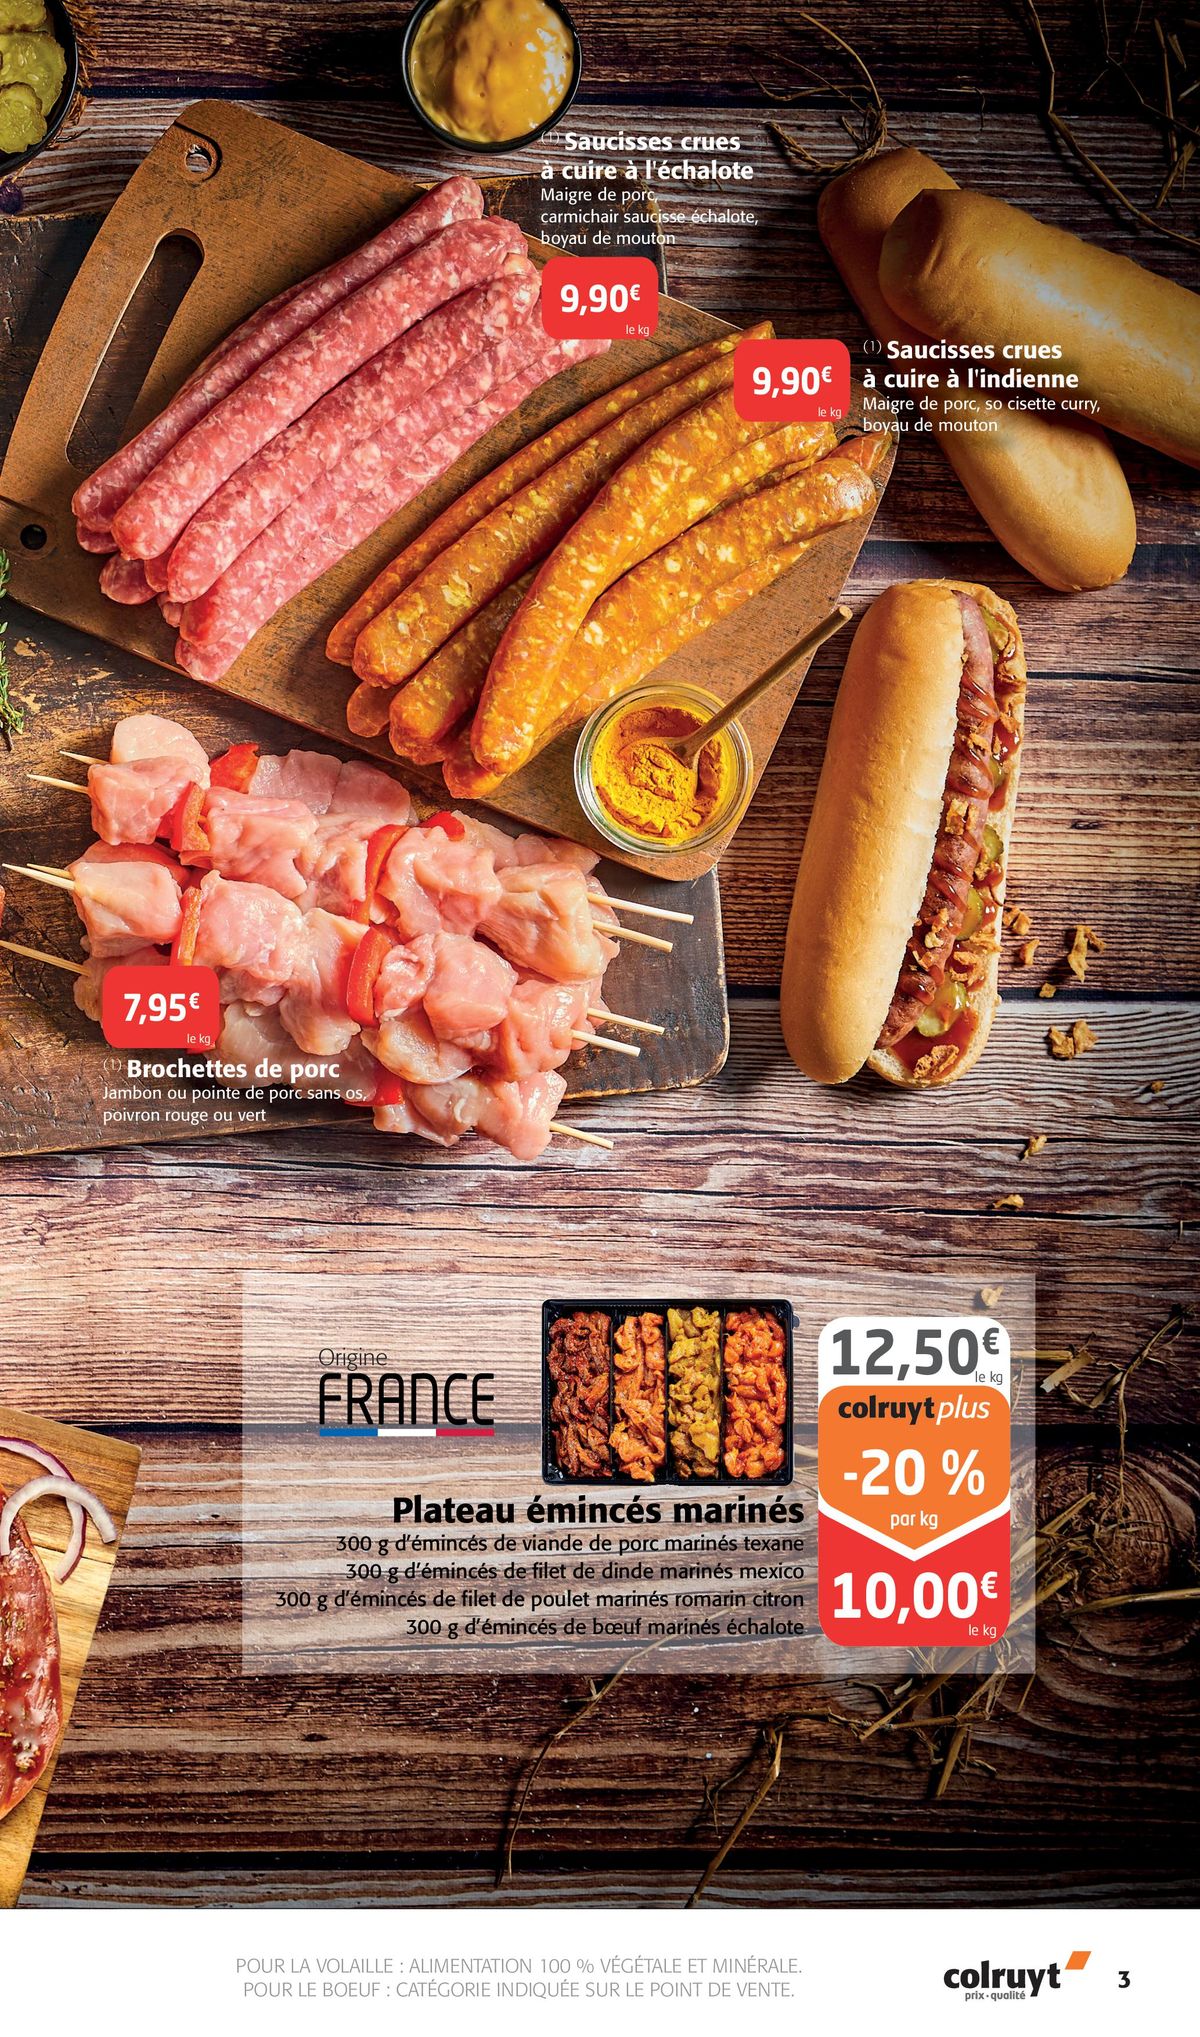 Catalogue The best of barbecue, page 00003